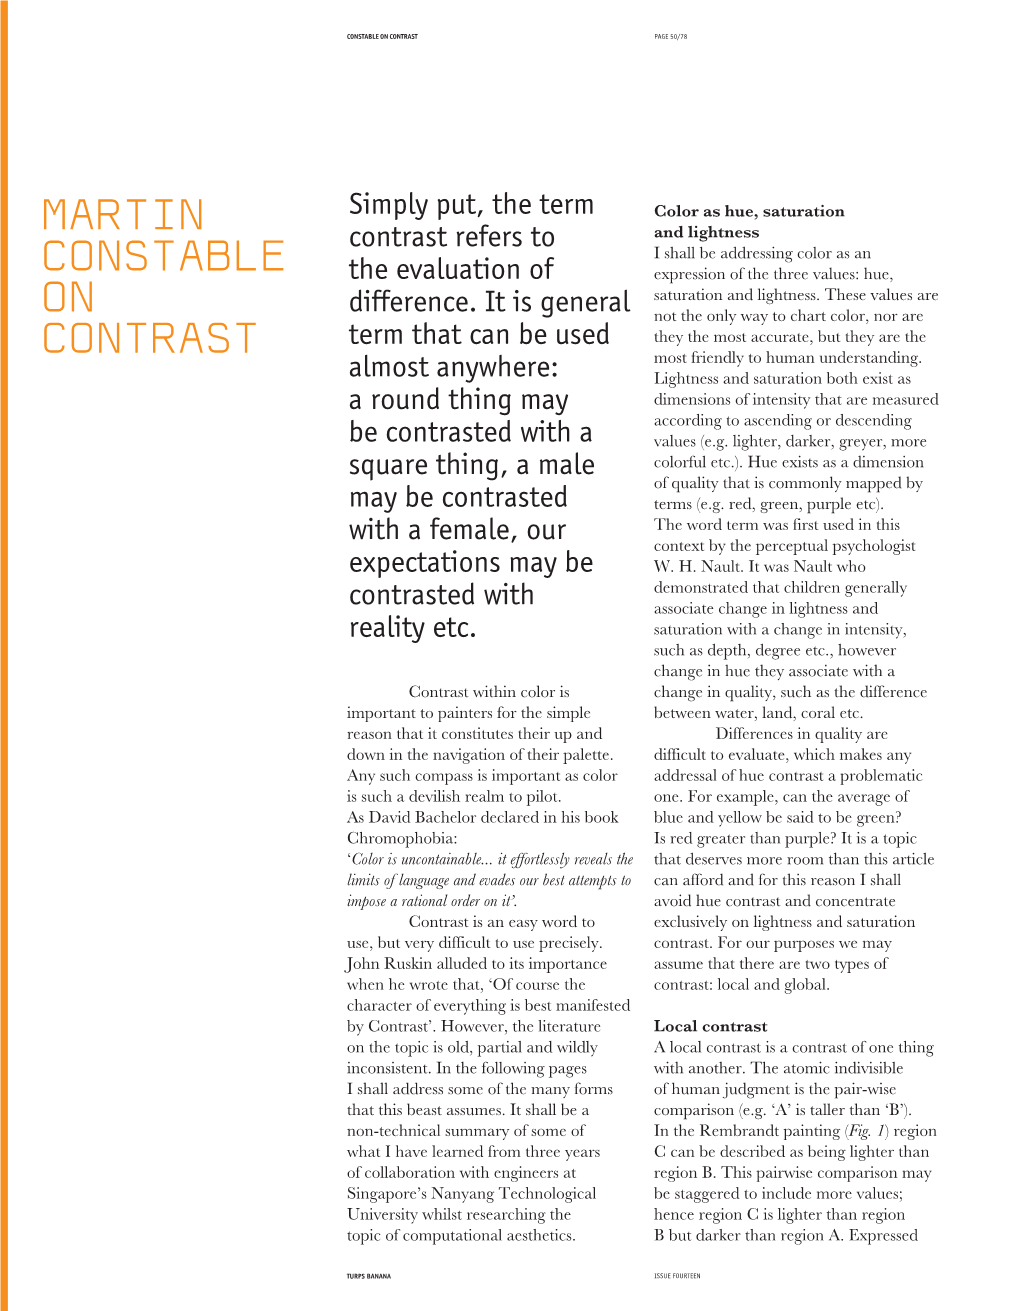 Martin Constable on Contrast